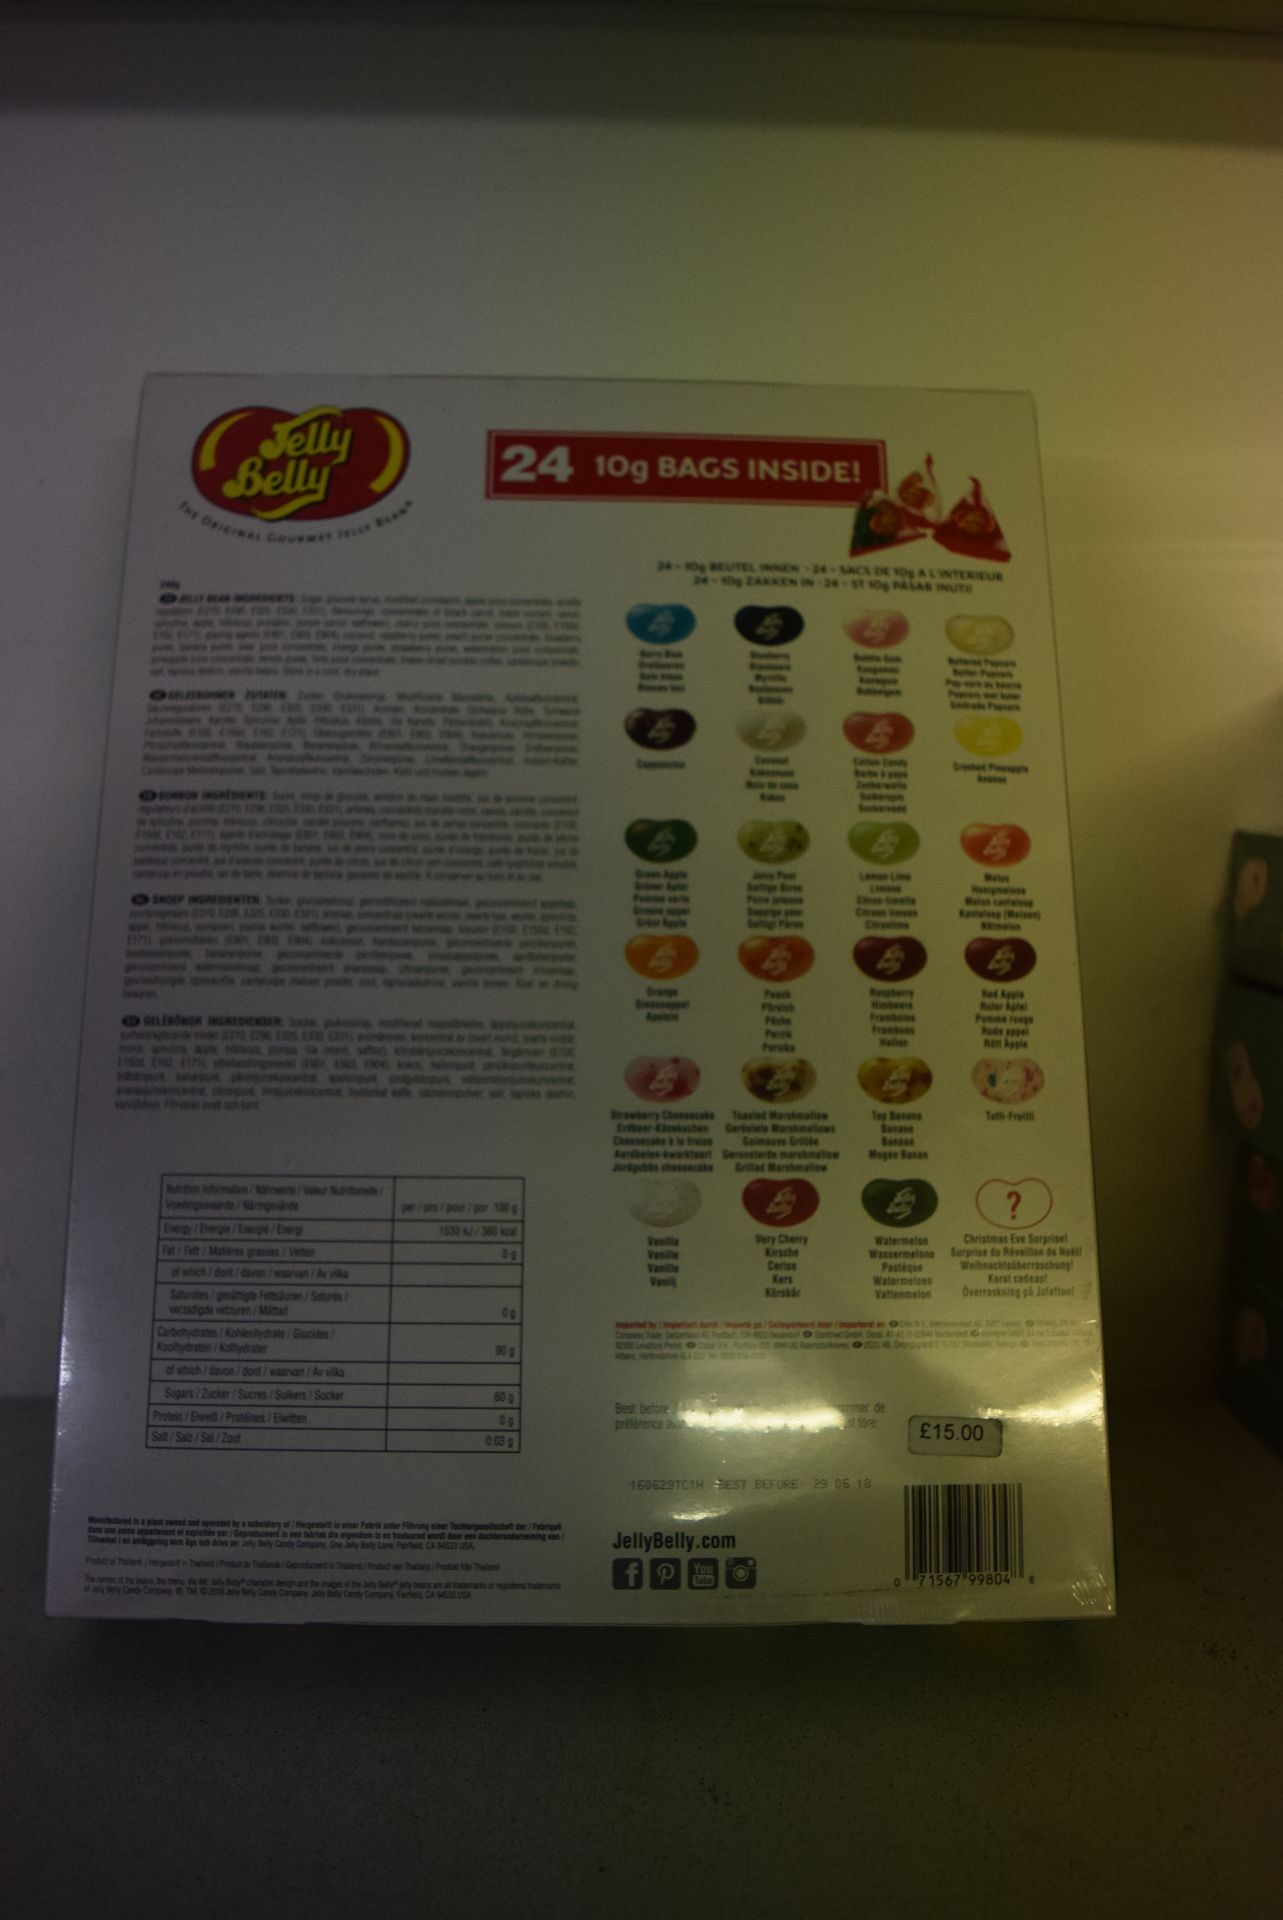 1 X JELLY BELLY THE ORIGINAL GOURMET JELLYBEAN CONTAINING 24 X 10G BAGS INSIDE